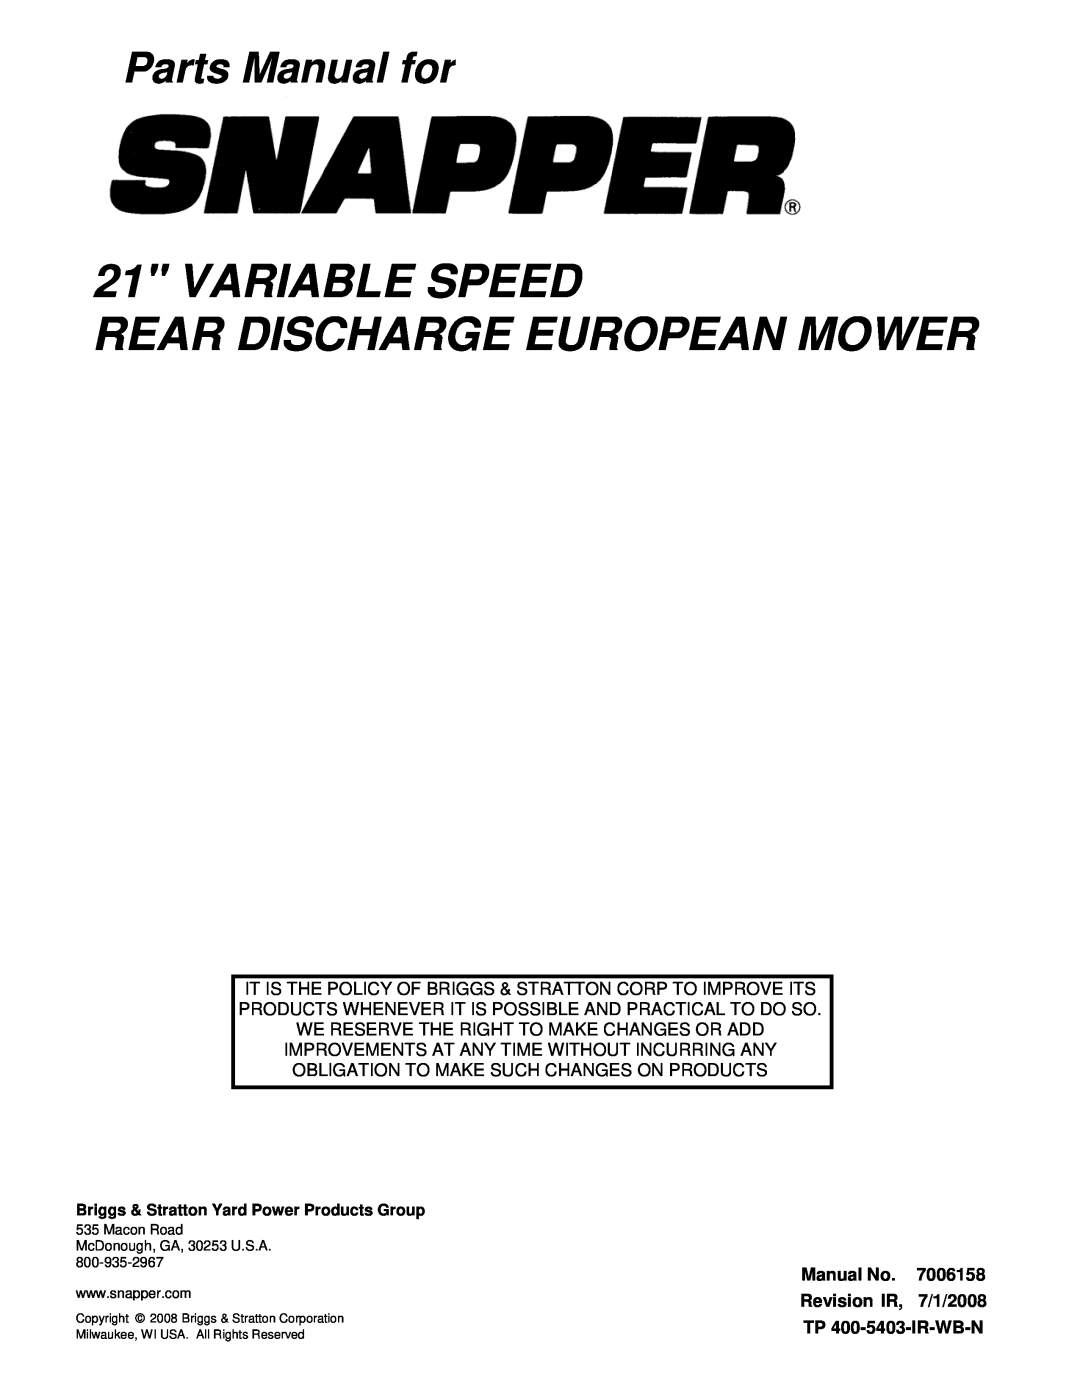 Snapper ESPV21675 (7800253) Variable Speed Rear Discharge European Mower, Revision IR, 7/1/2008, Parts Manual for, 7006158 